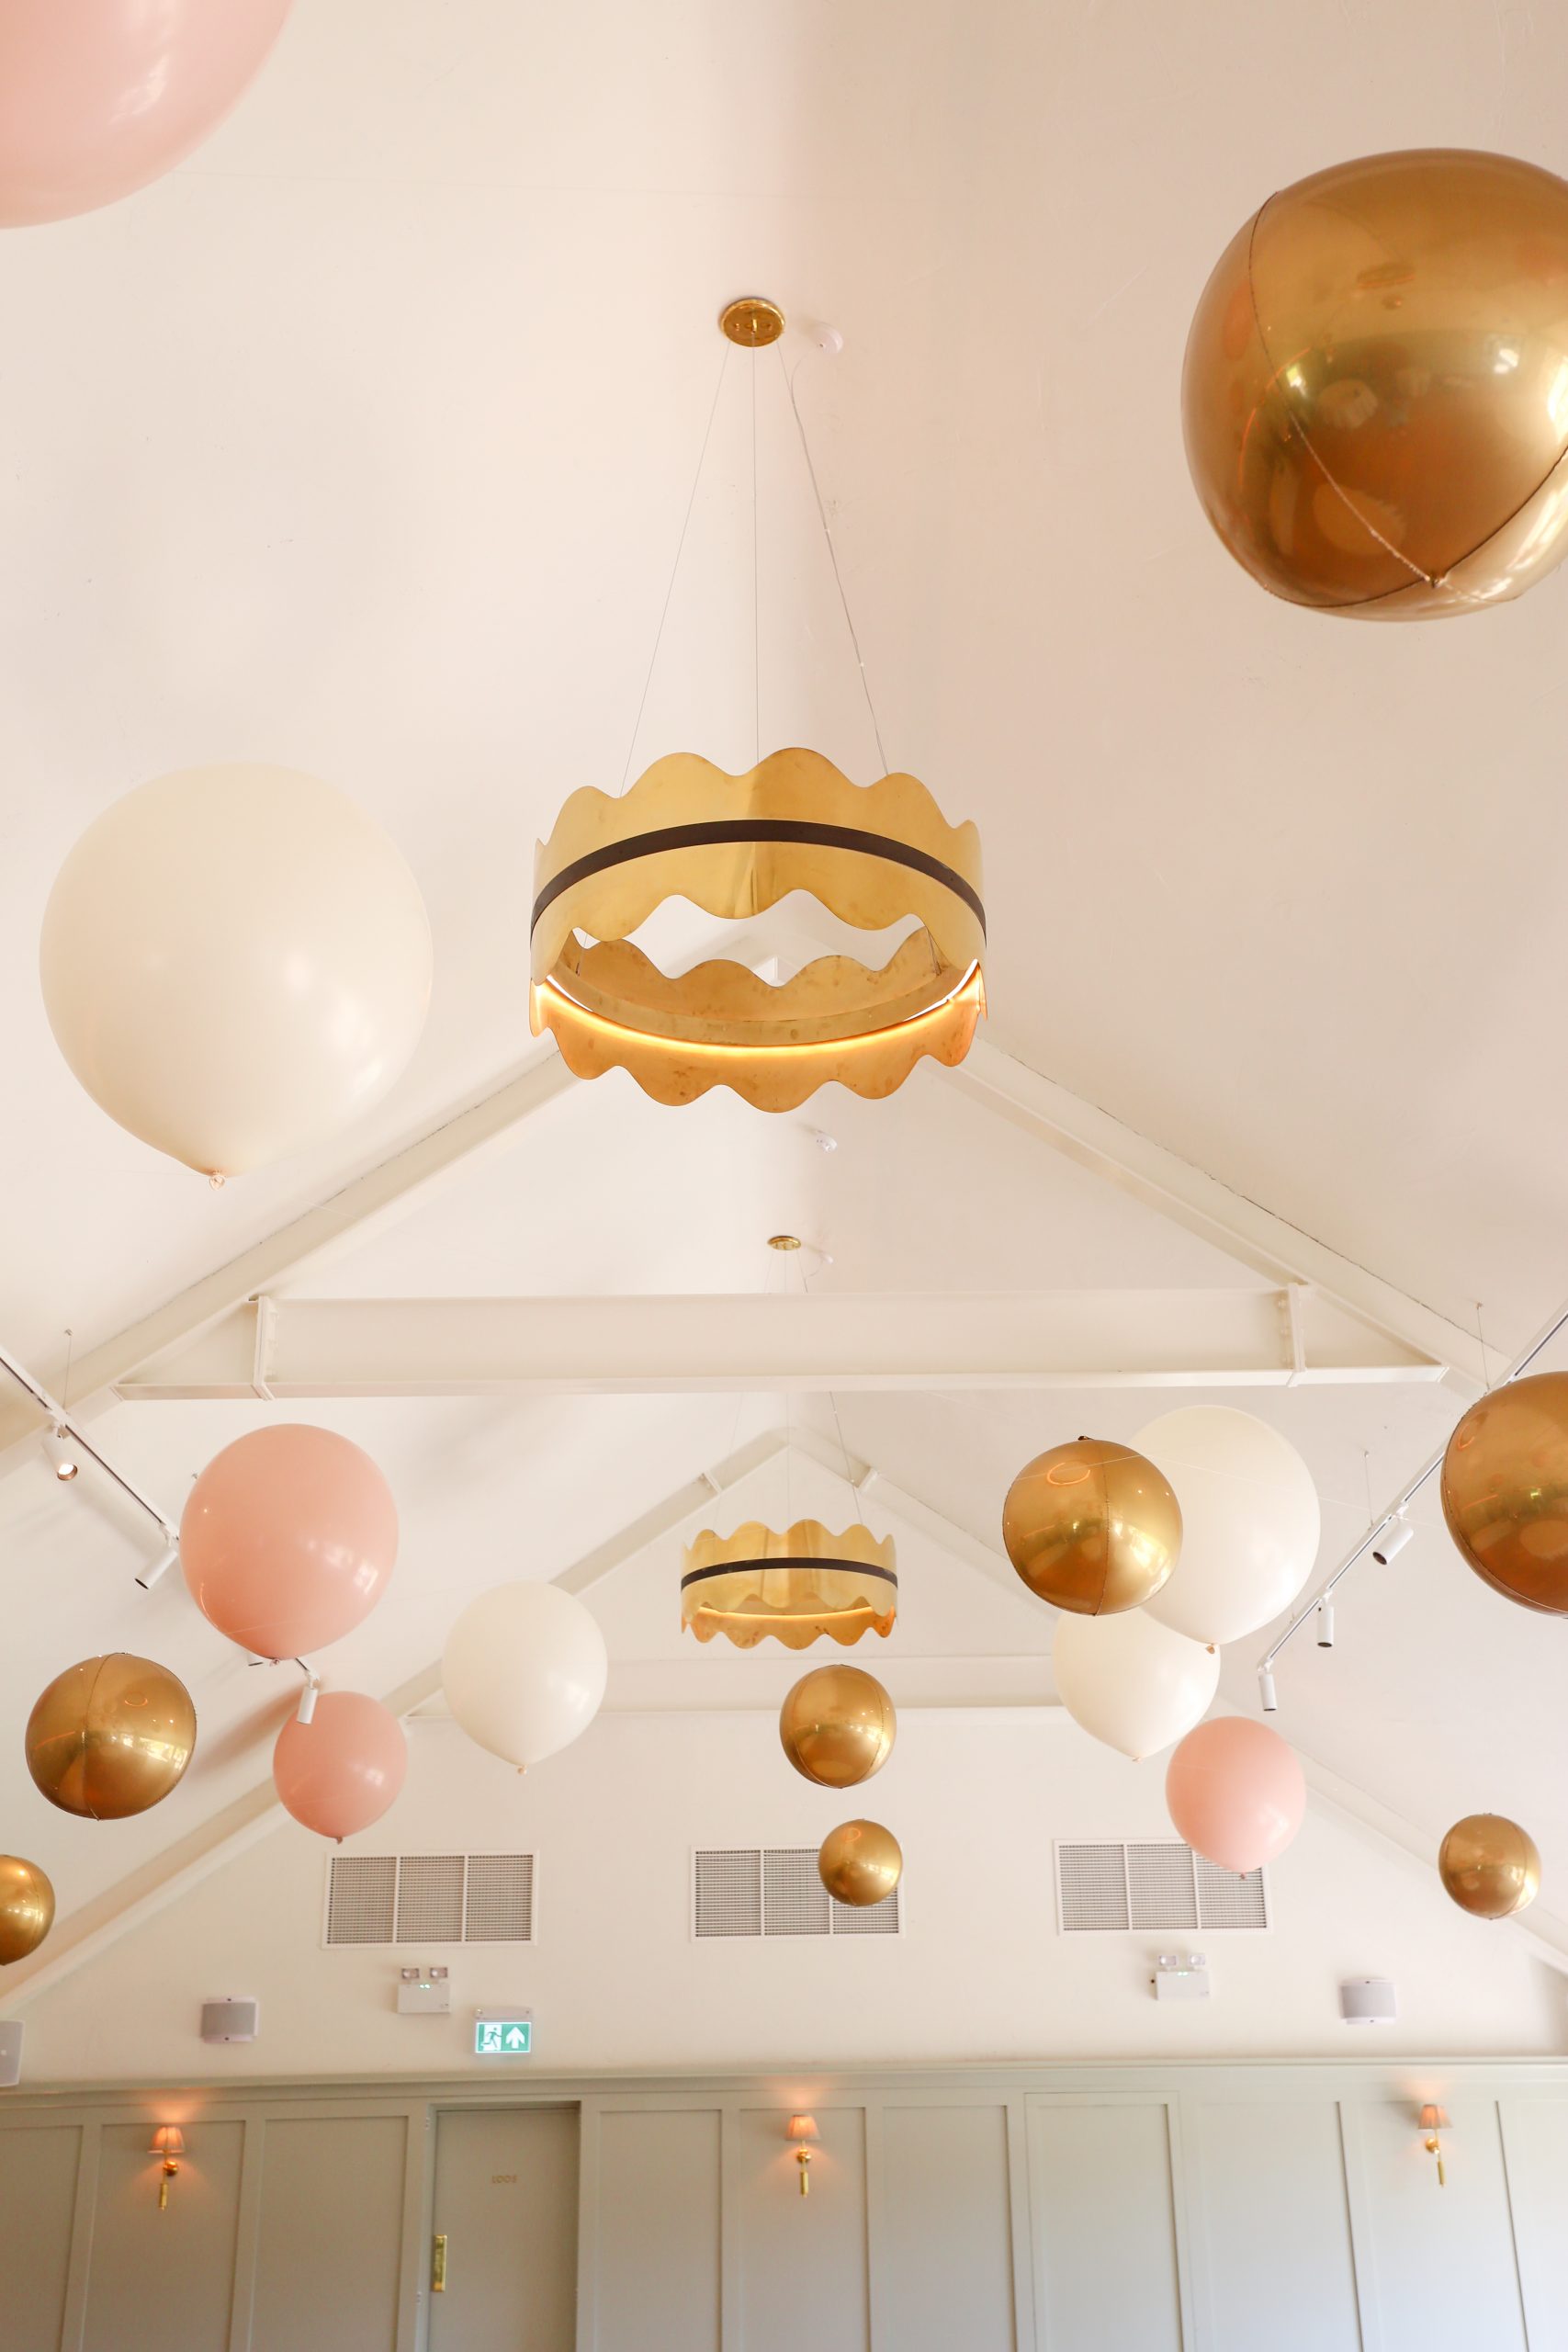 How to install a balloon ceiling